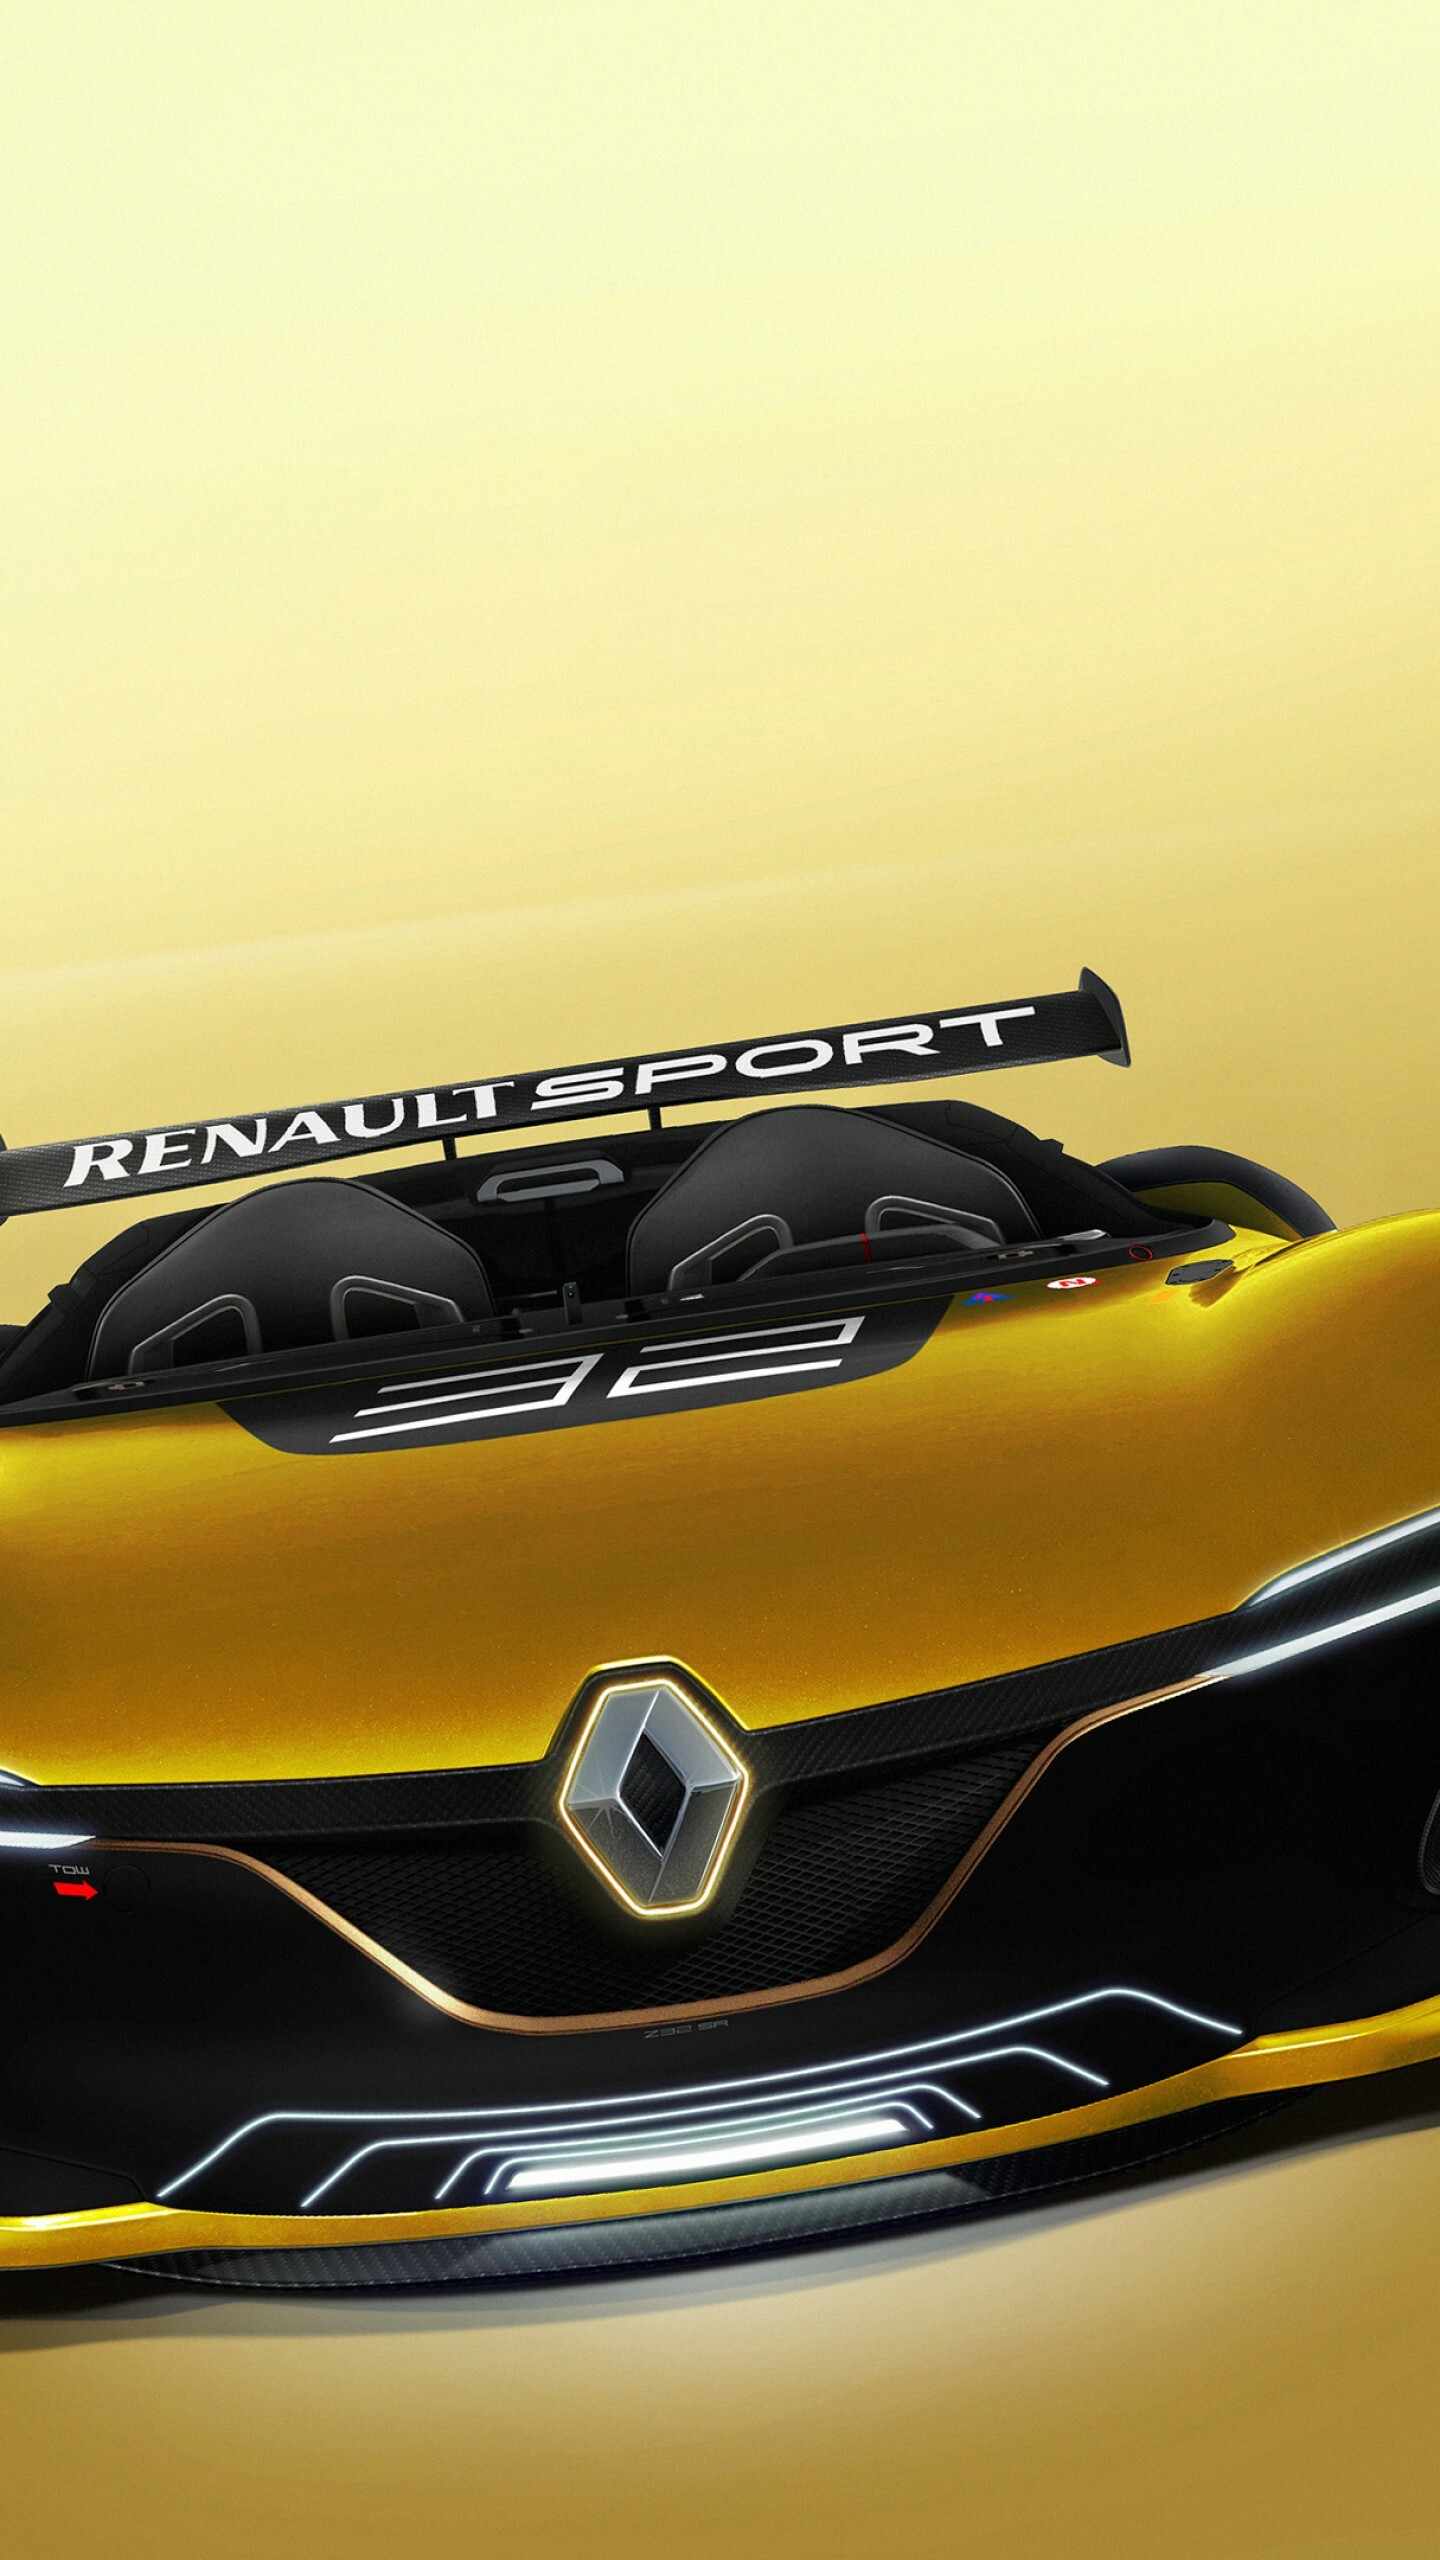 Renault: Sport Spider, A roadster produced by the French automaker, Cars. 1440x2560 HD Wallpaper.